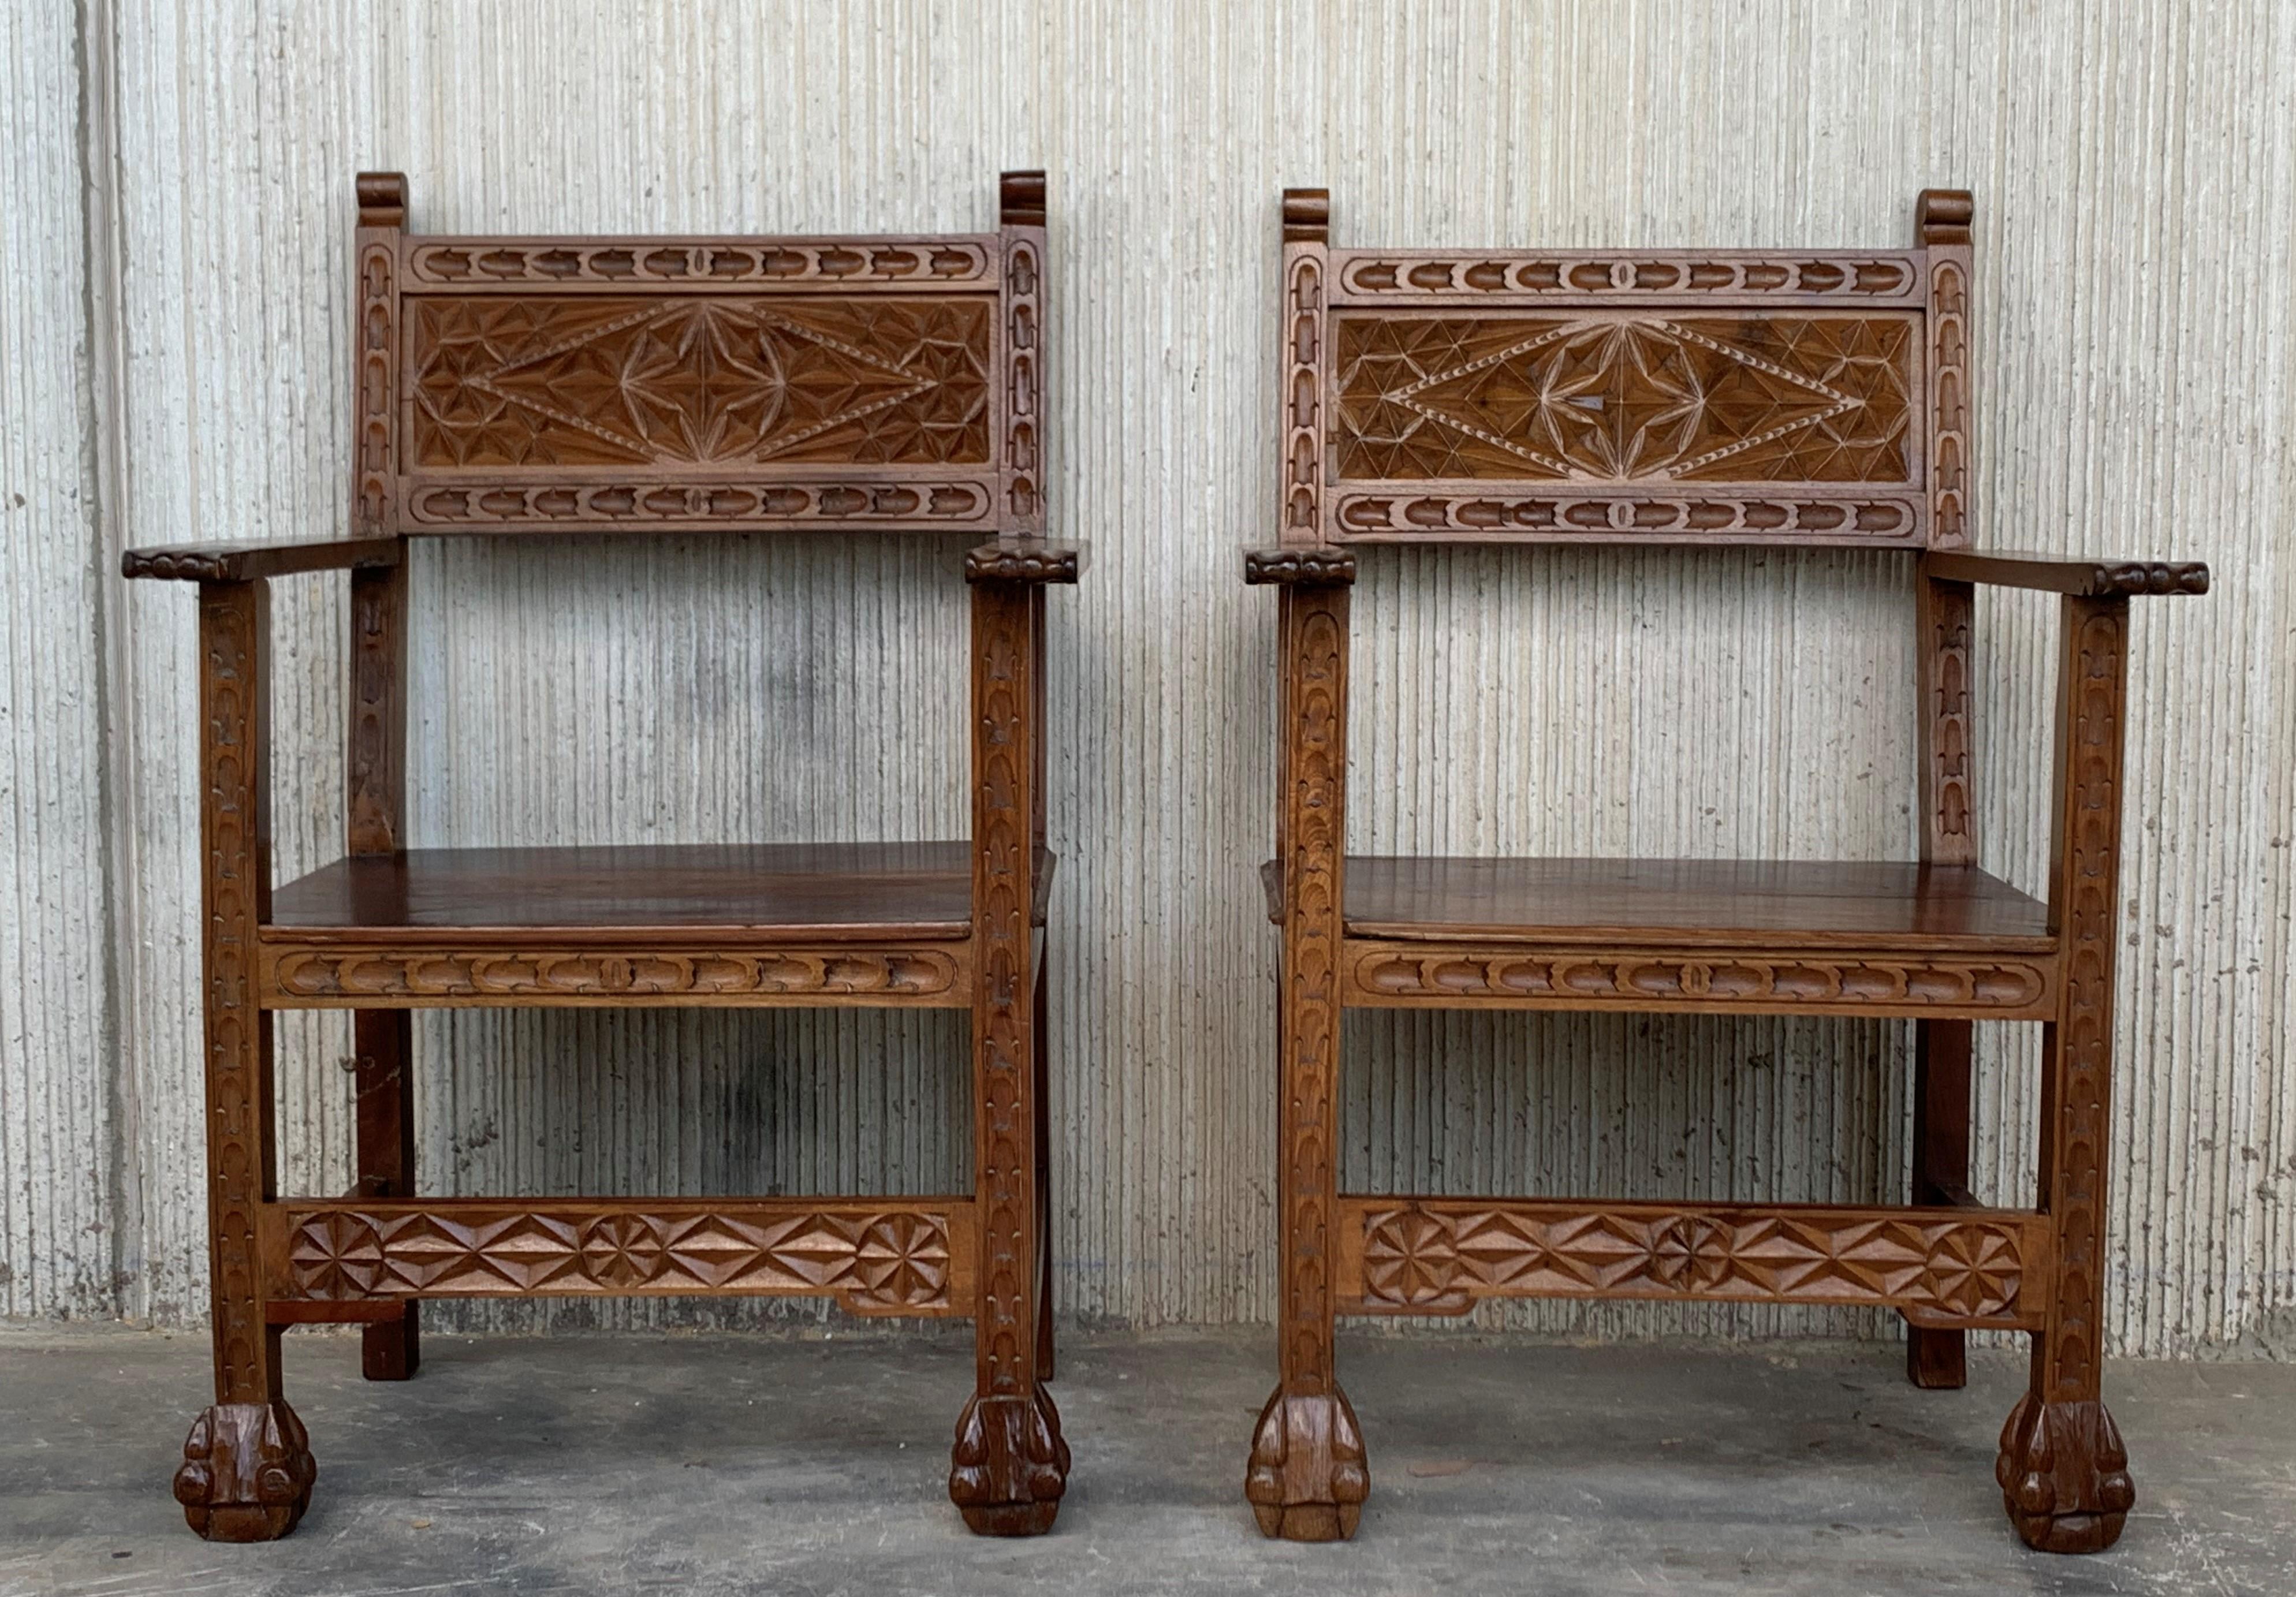 19th century Spanish colonial altar armchairs with wood seat with ornamental carved

Measures: Height to arms 27.55 in.